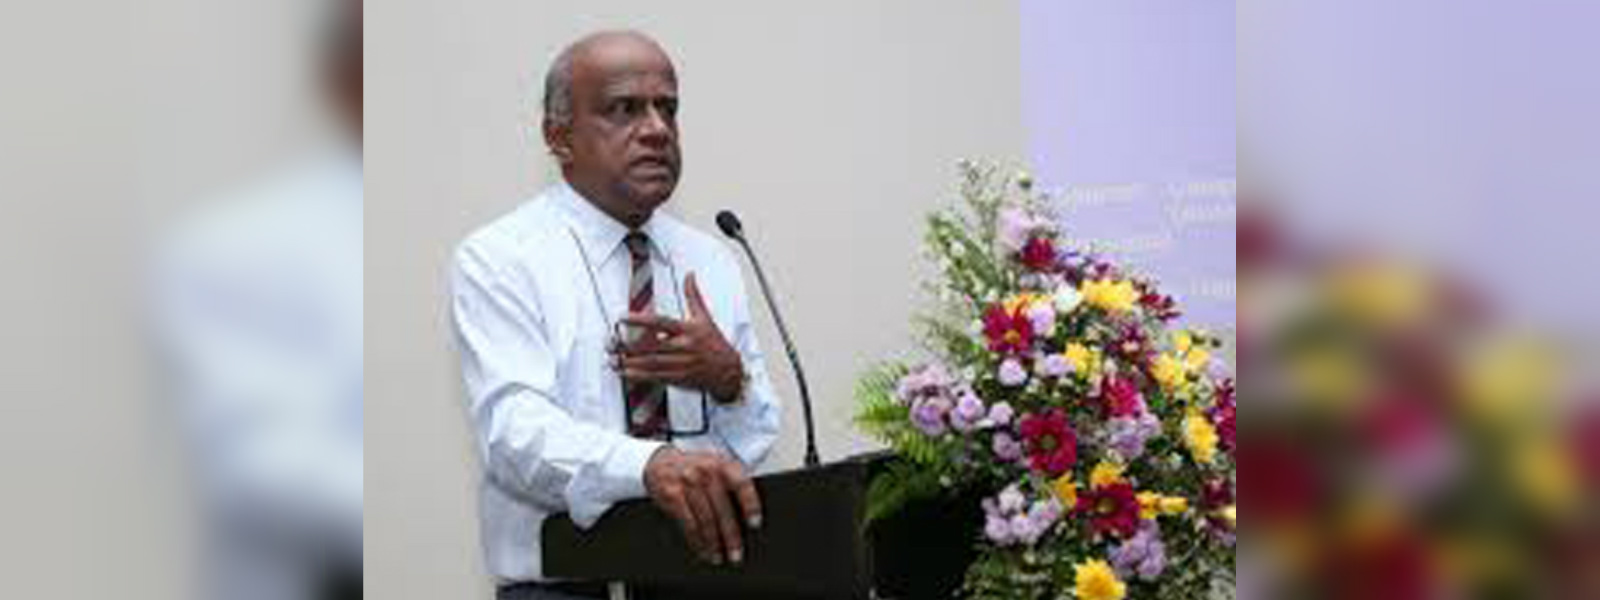 New Chairman of SL Medical Council appointed